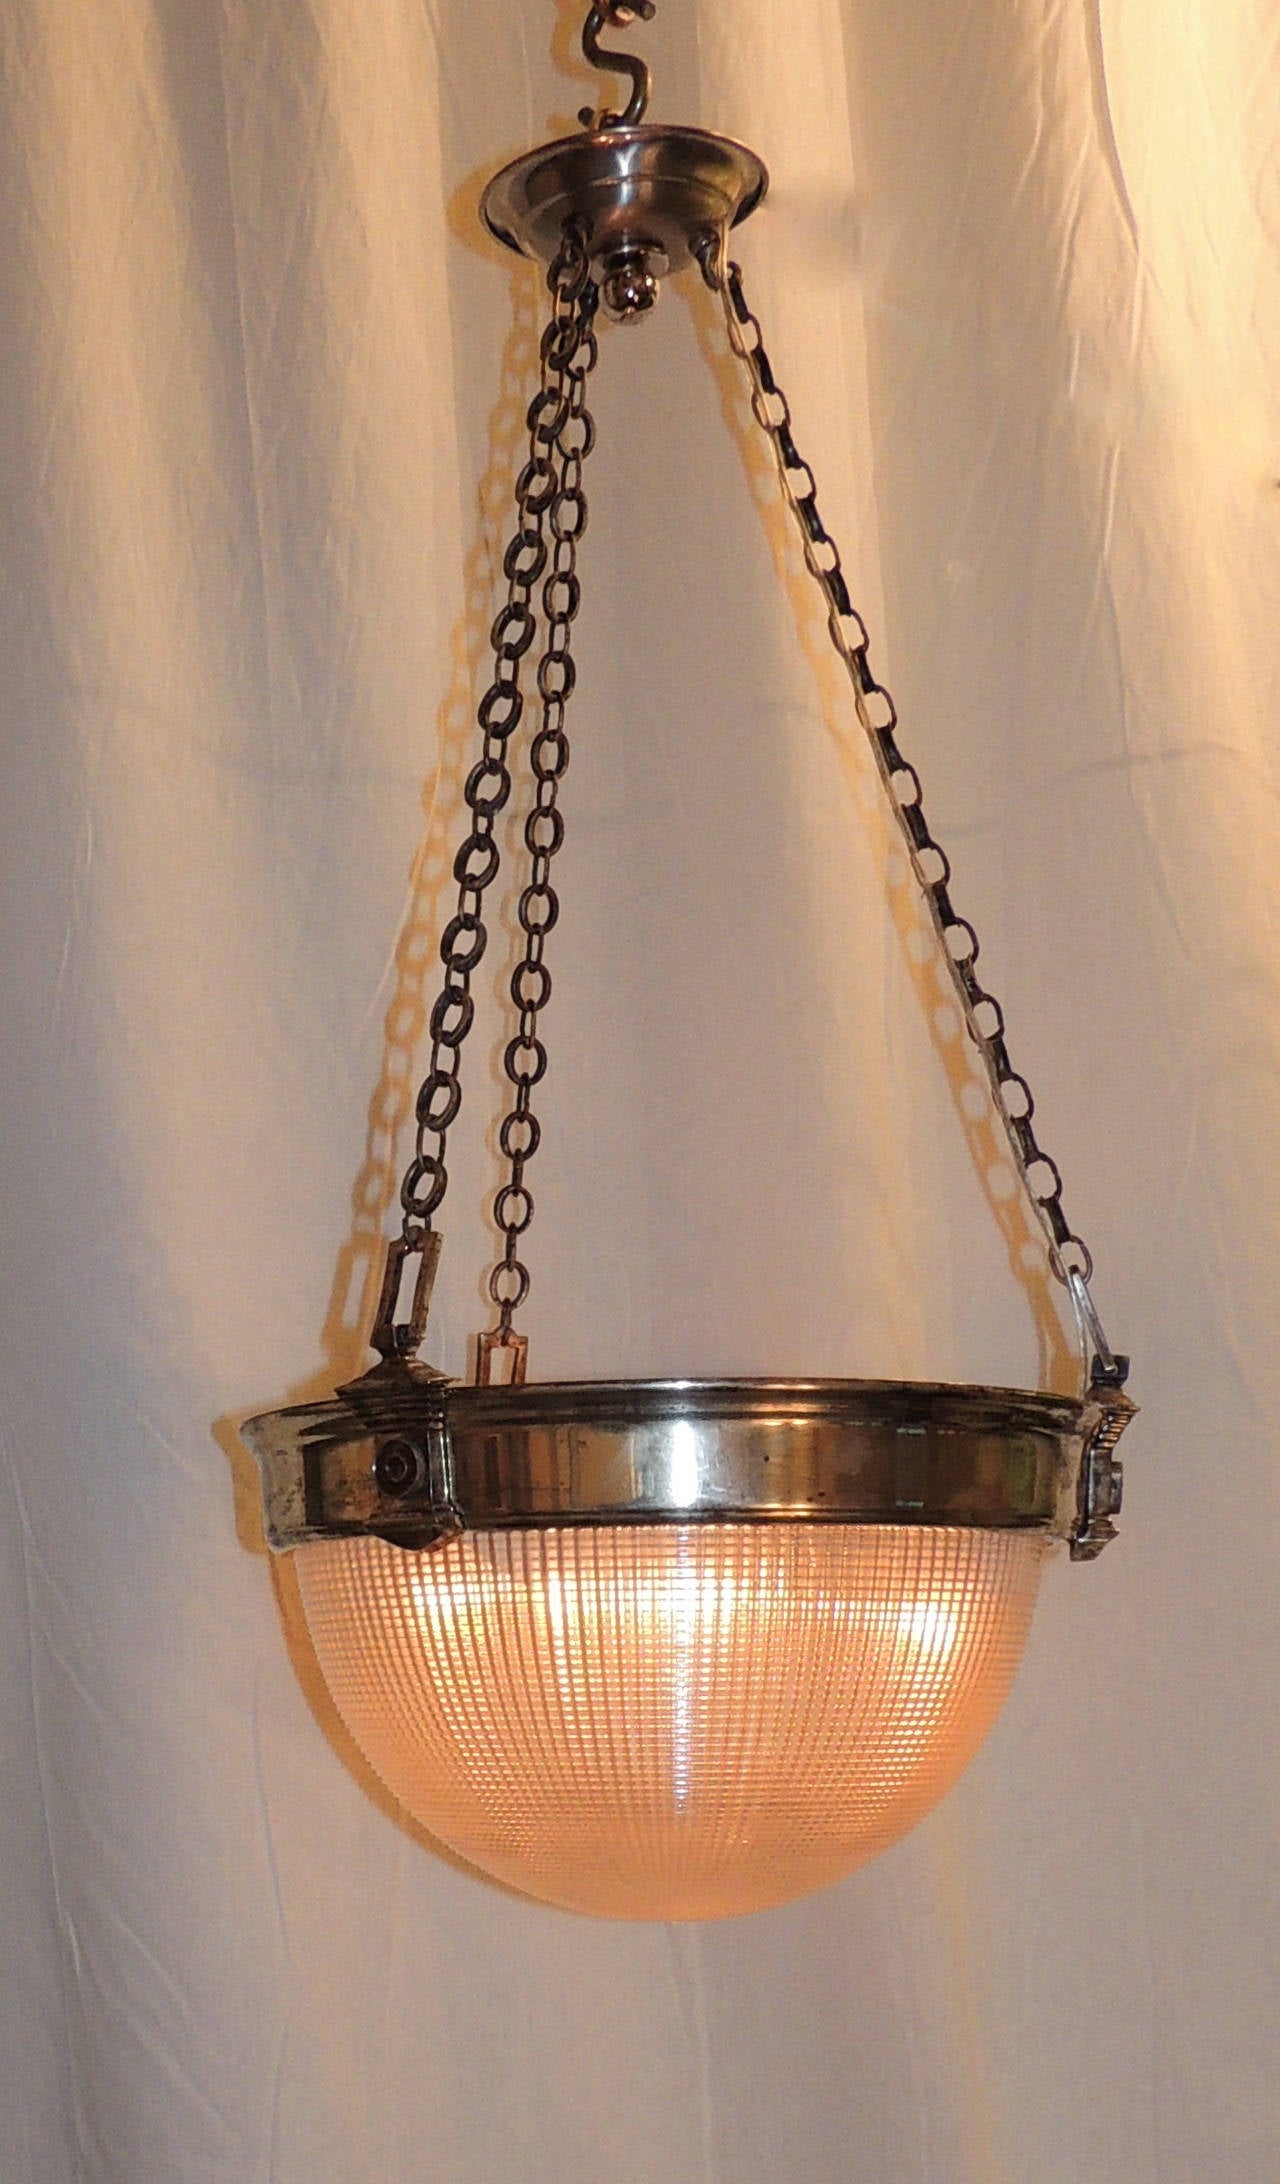 Frosted Vintage Holophane Glass Silvered Bronze Nickel Chrome Chandelier Fixture Pendent